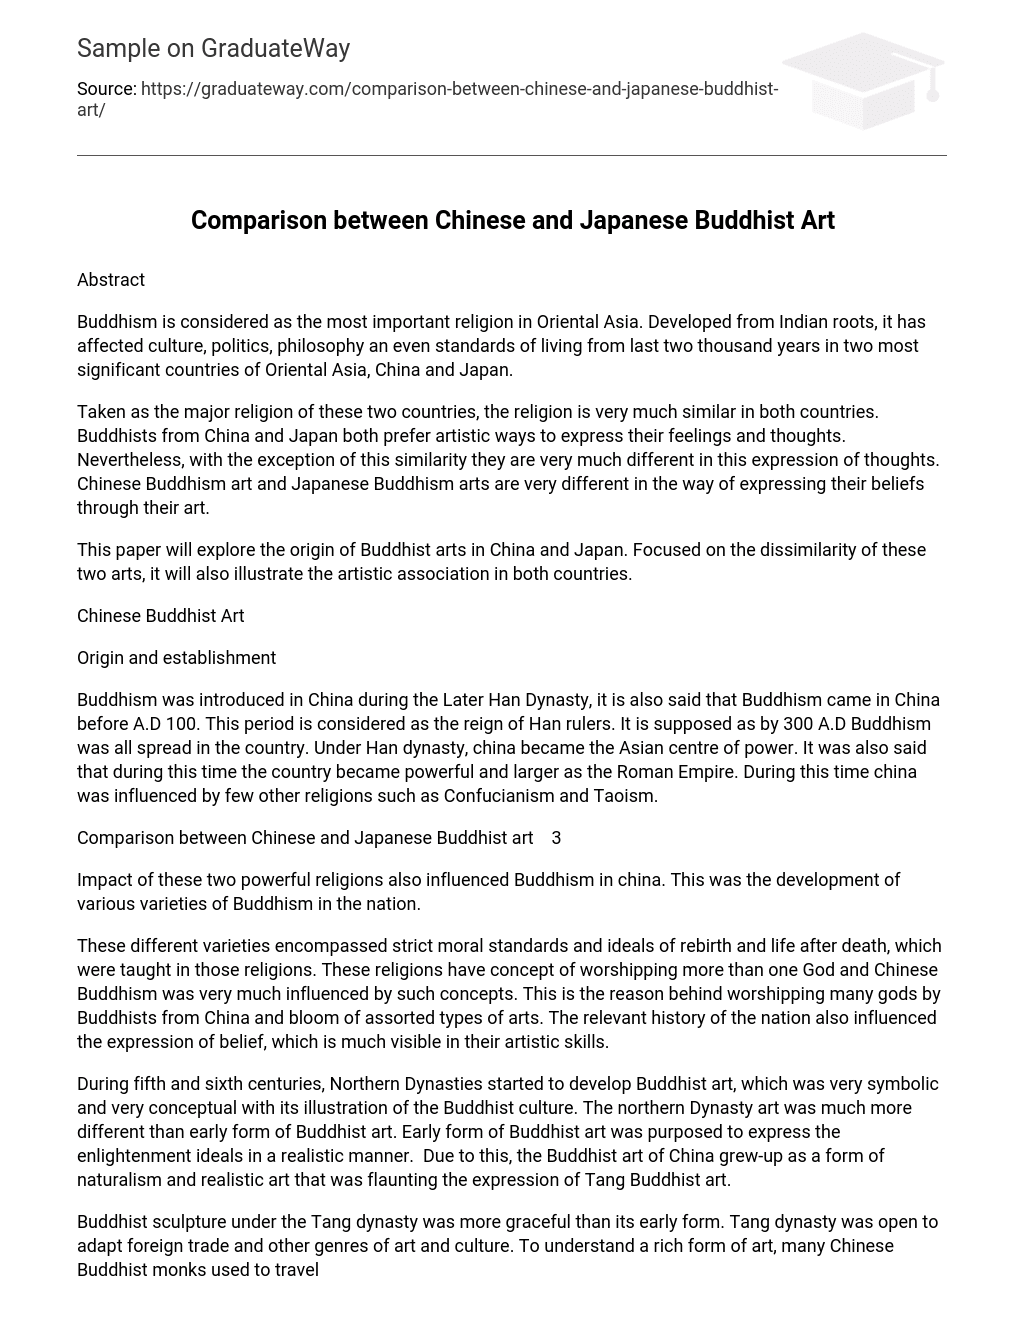 Comparison between Chinese and Japanese Buddhist Art